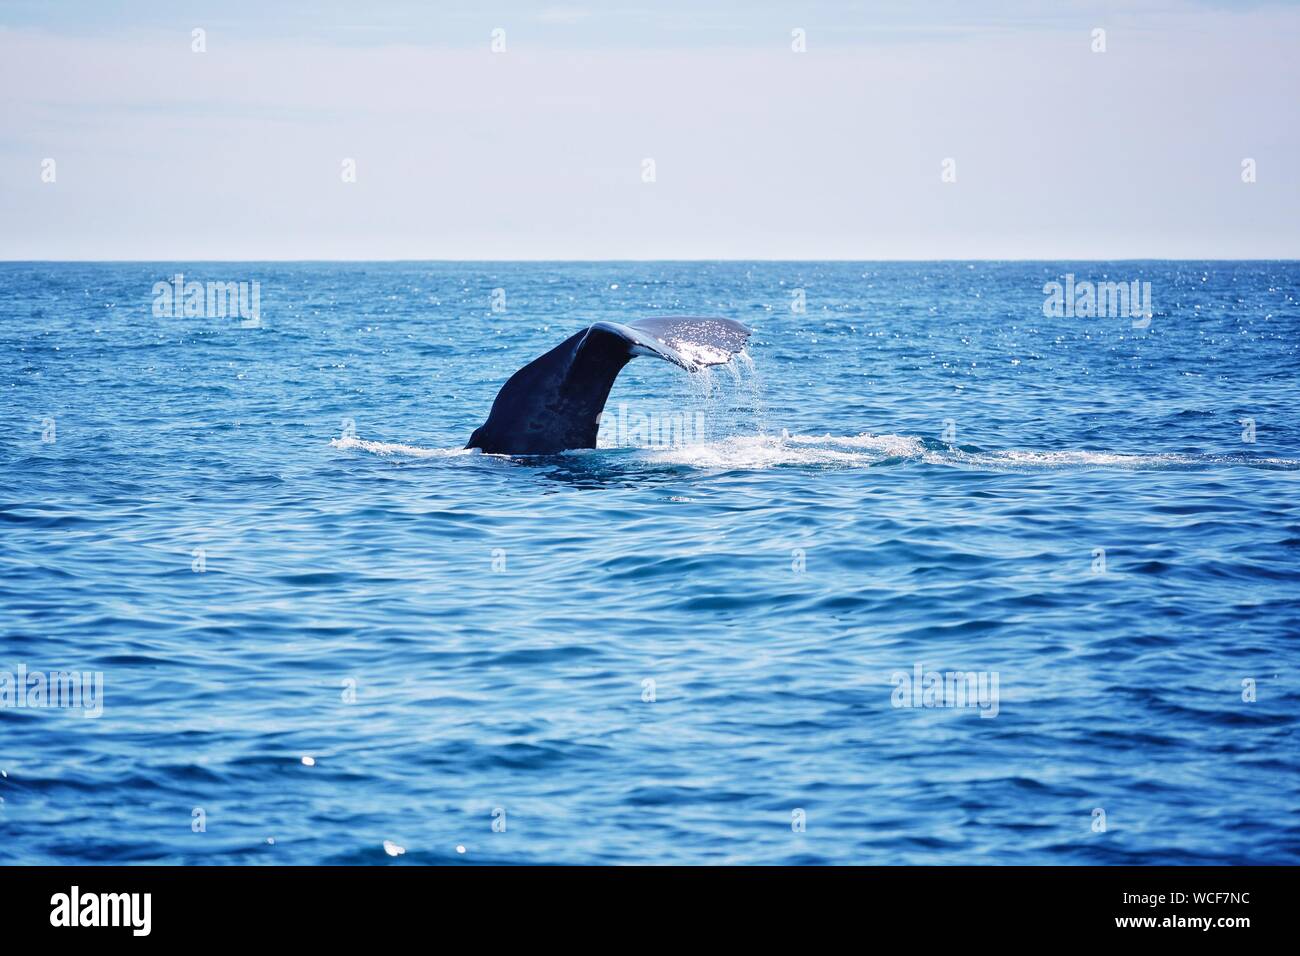 Whale Tail Fluke In Sea Against Sky Stock Photo